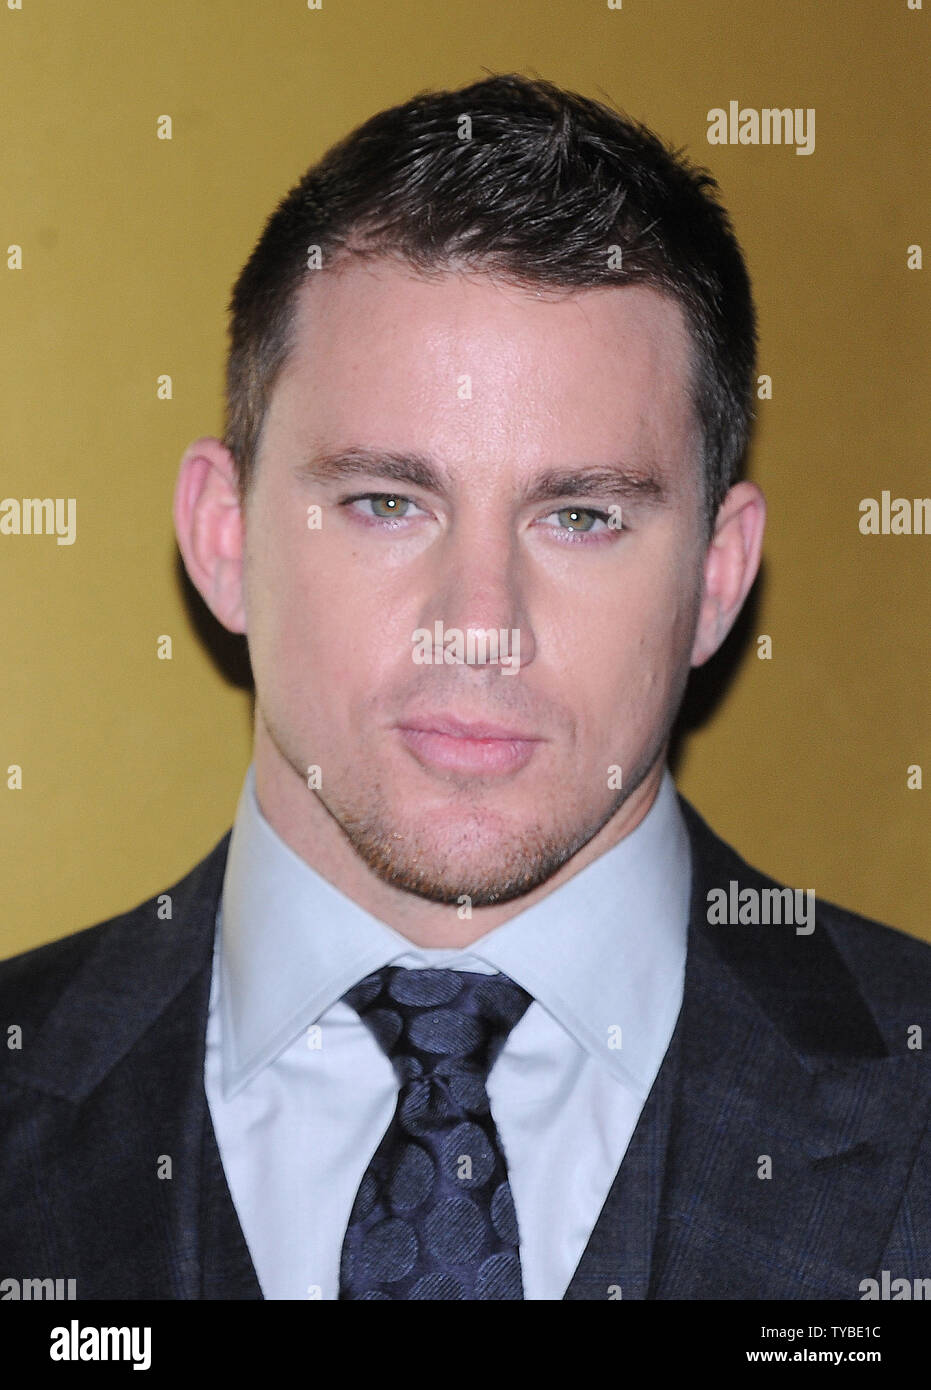 American actor Channing Tatum attends the European premiere of 'Magic Mike' at The Mayfair Hotel in London on July 10, 2012.     UPI/Paul Treadway.. Stock Photo